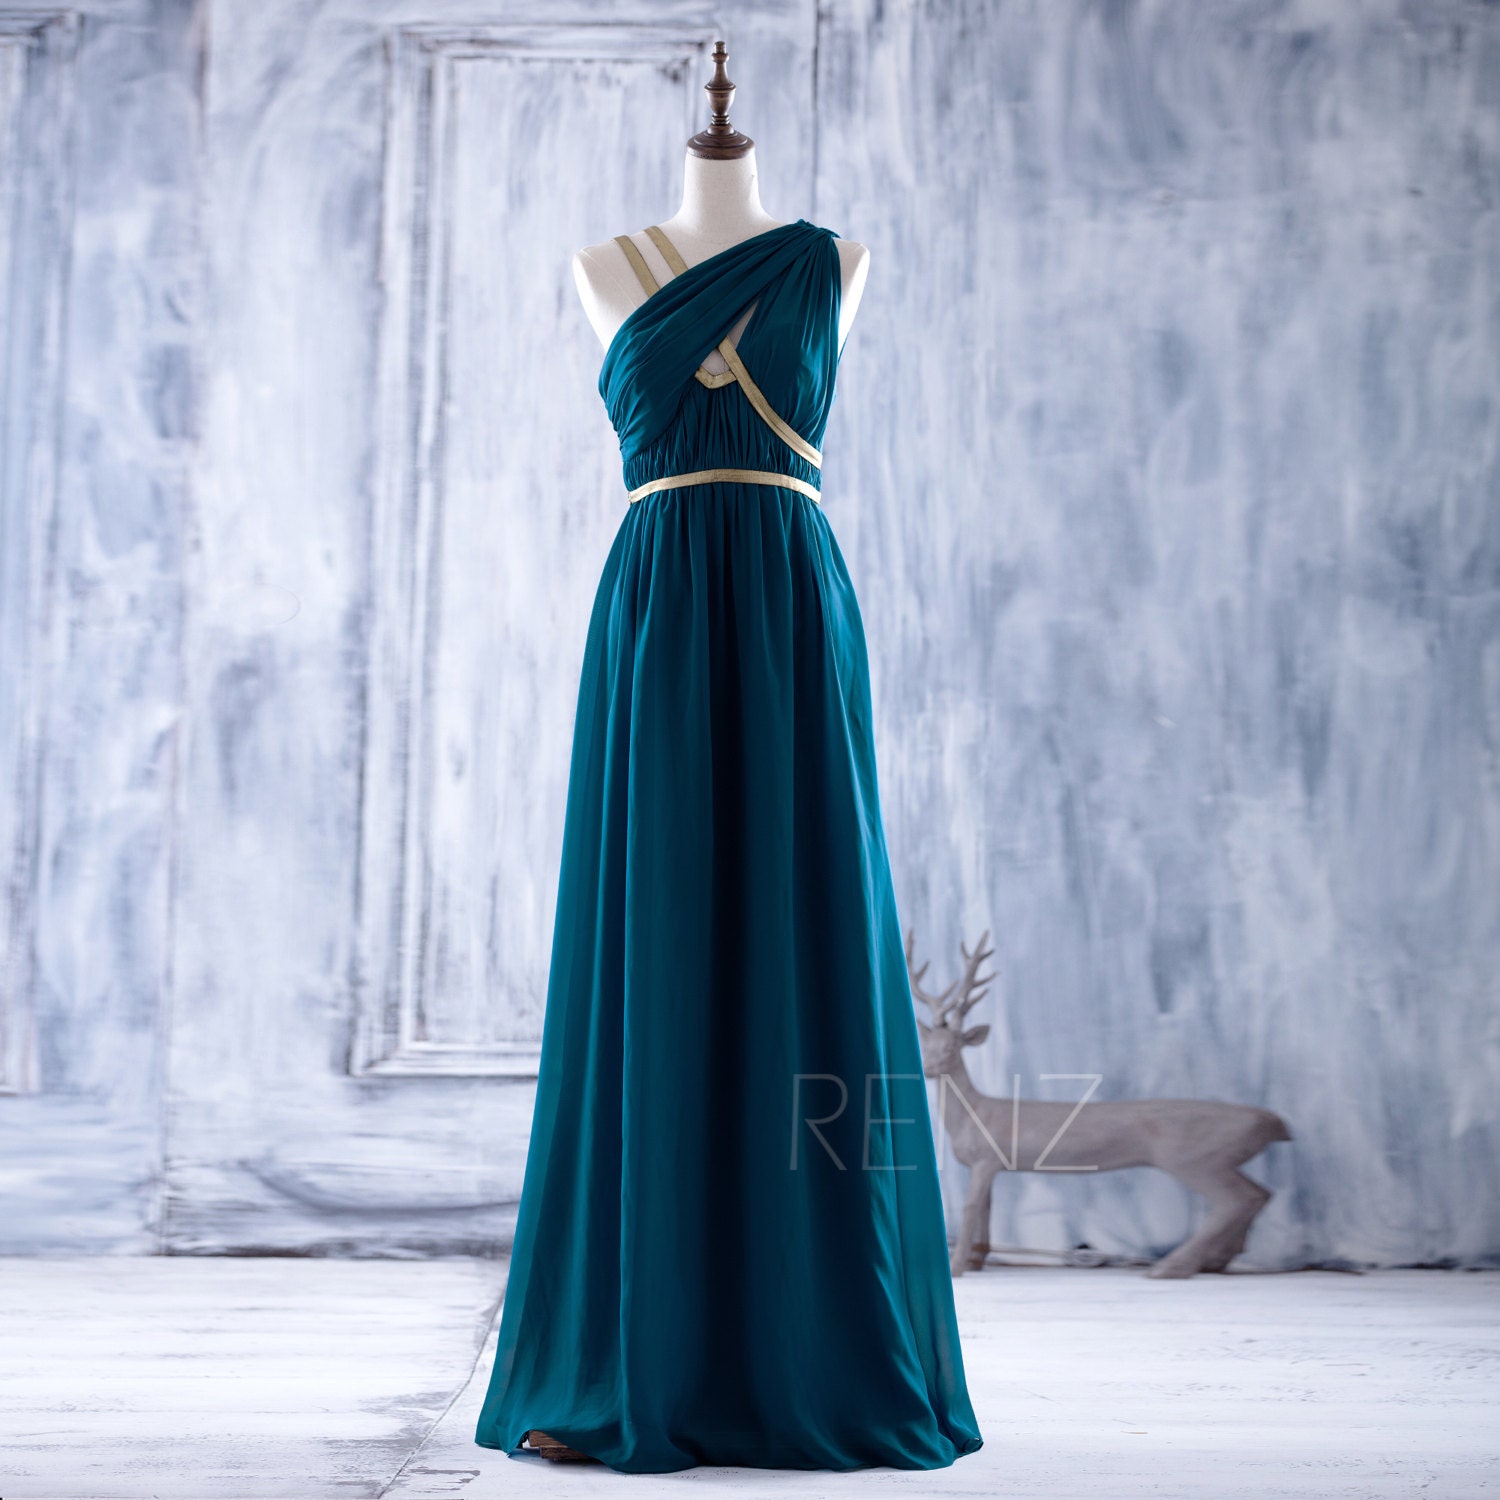 2016 Peacock Bridesmaid dress with Gold Belt Long by RenzRags